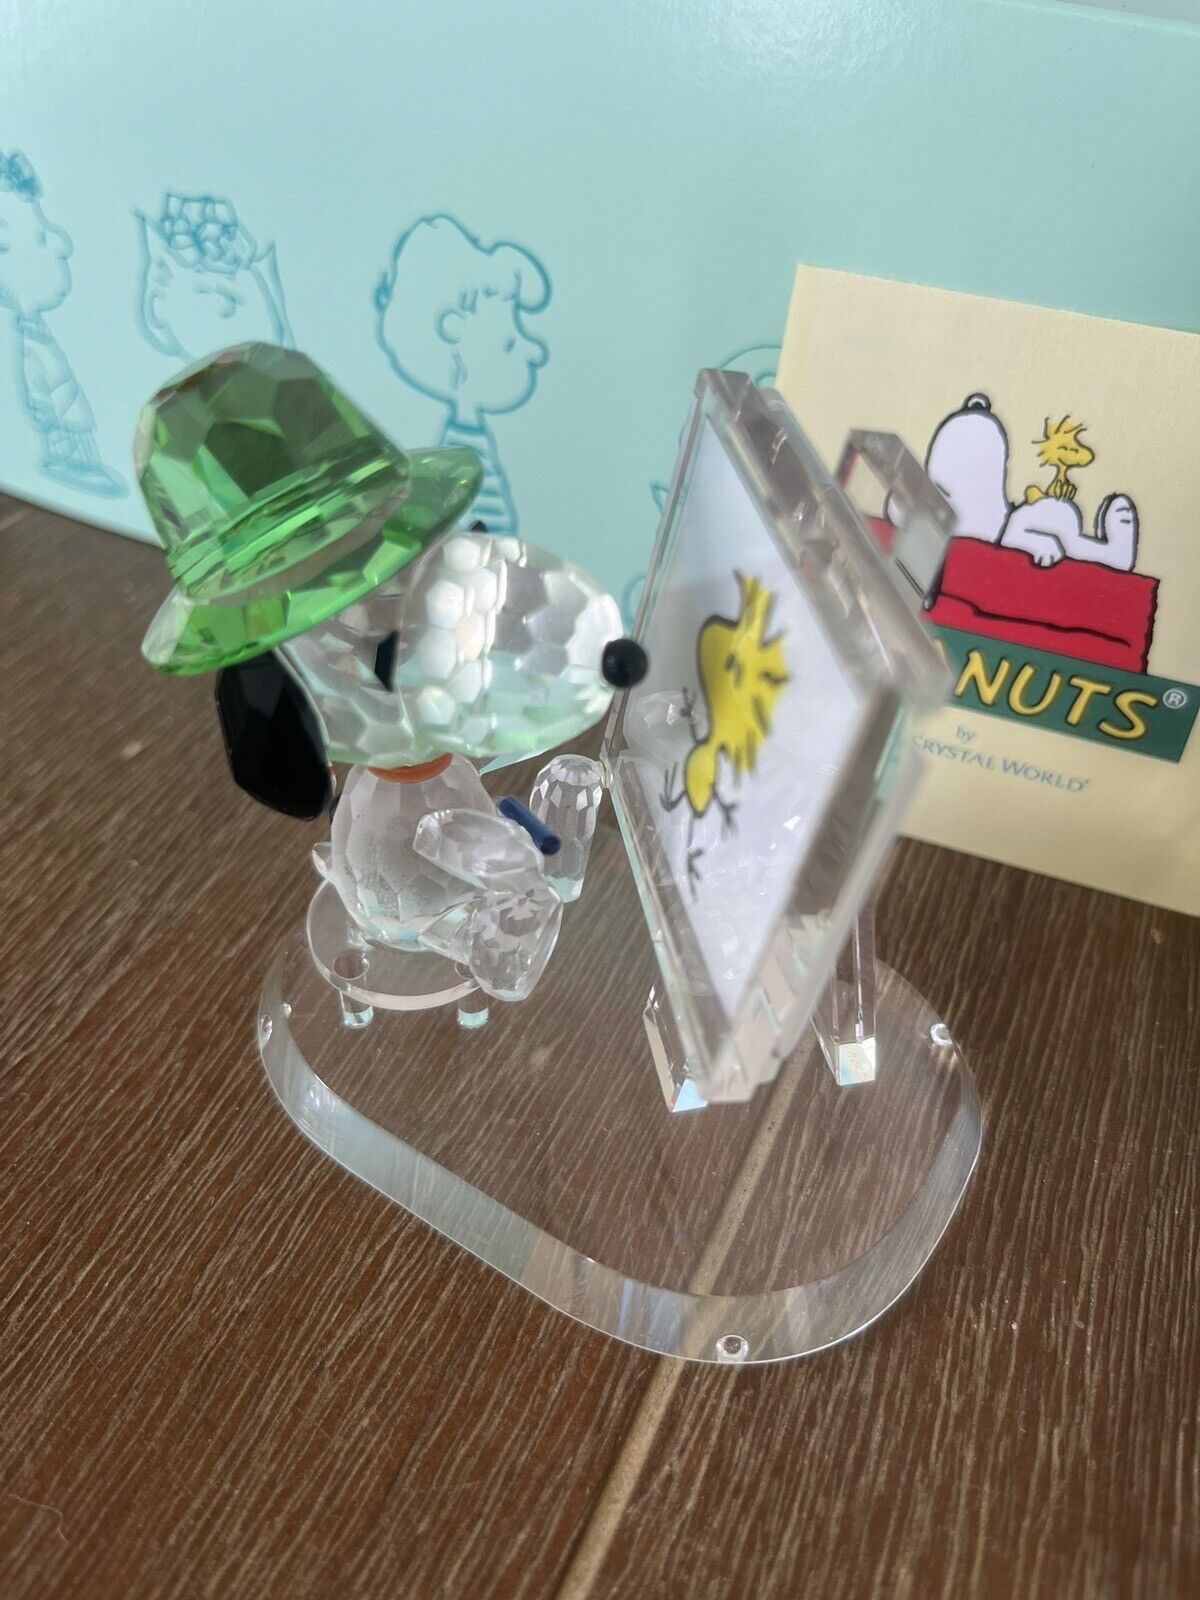 Crystal World Snoopy Art Woodstock Great Condition